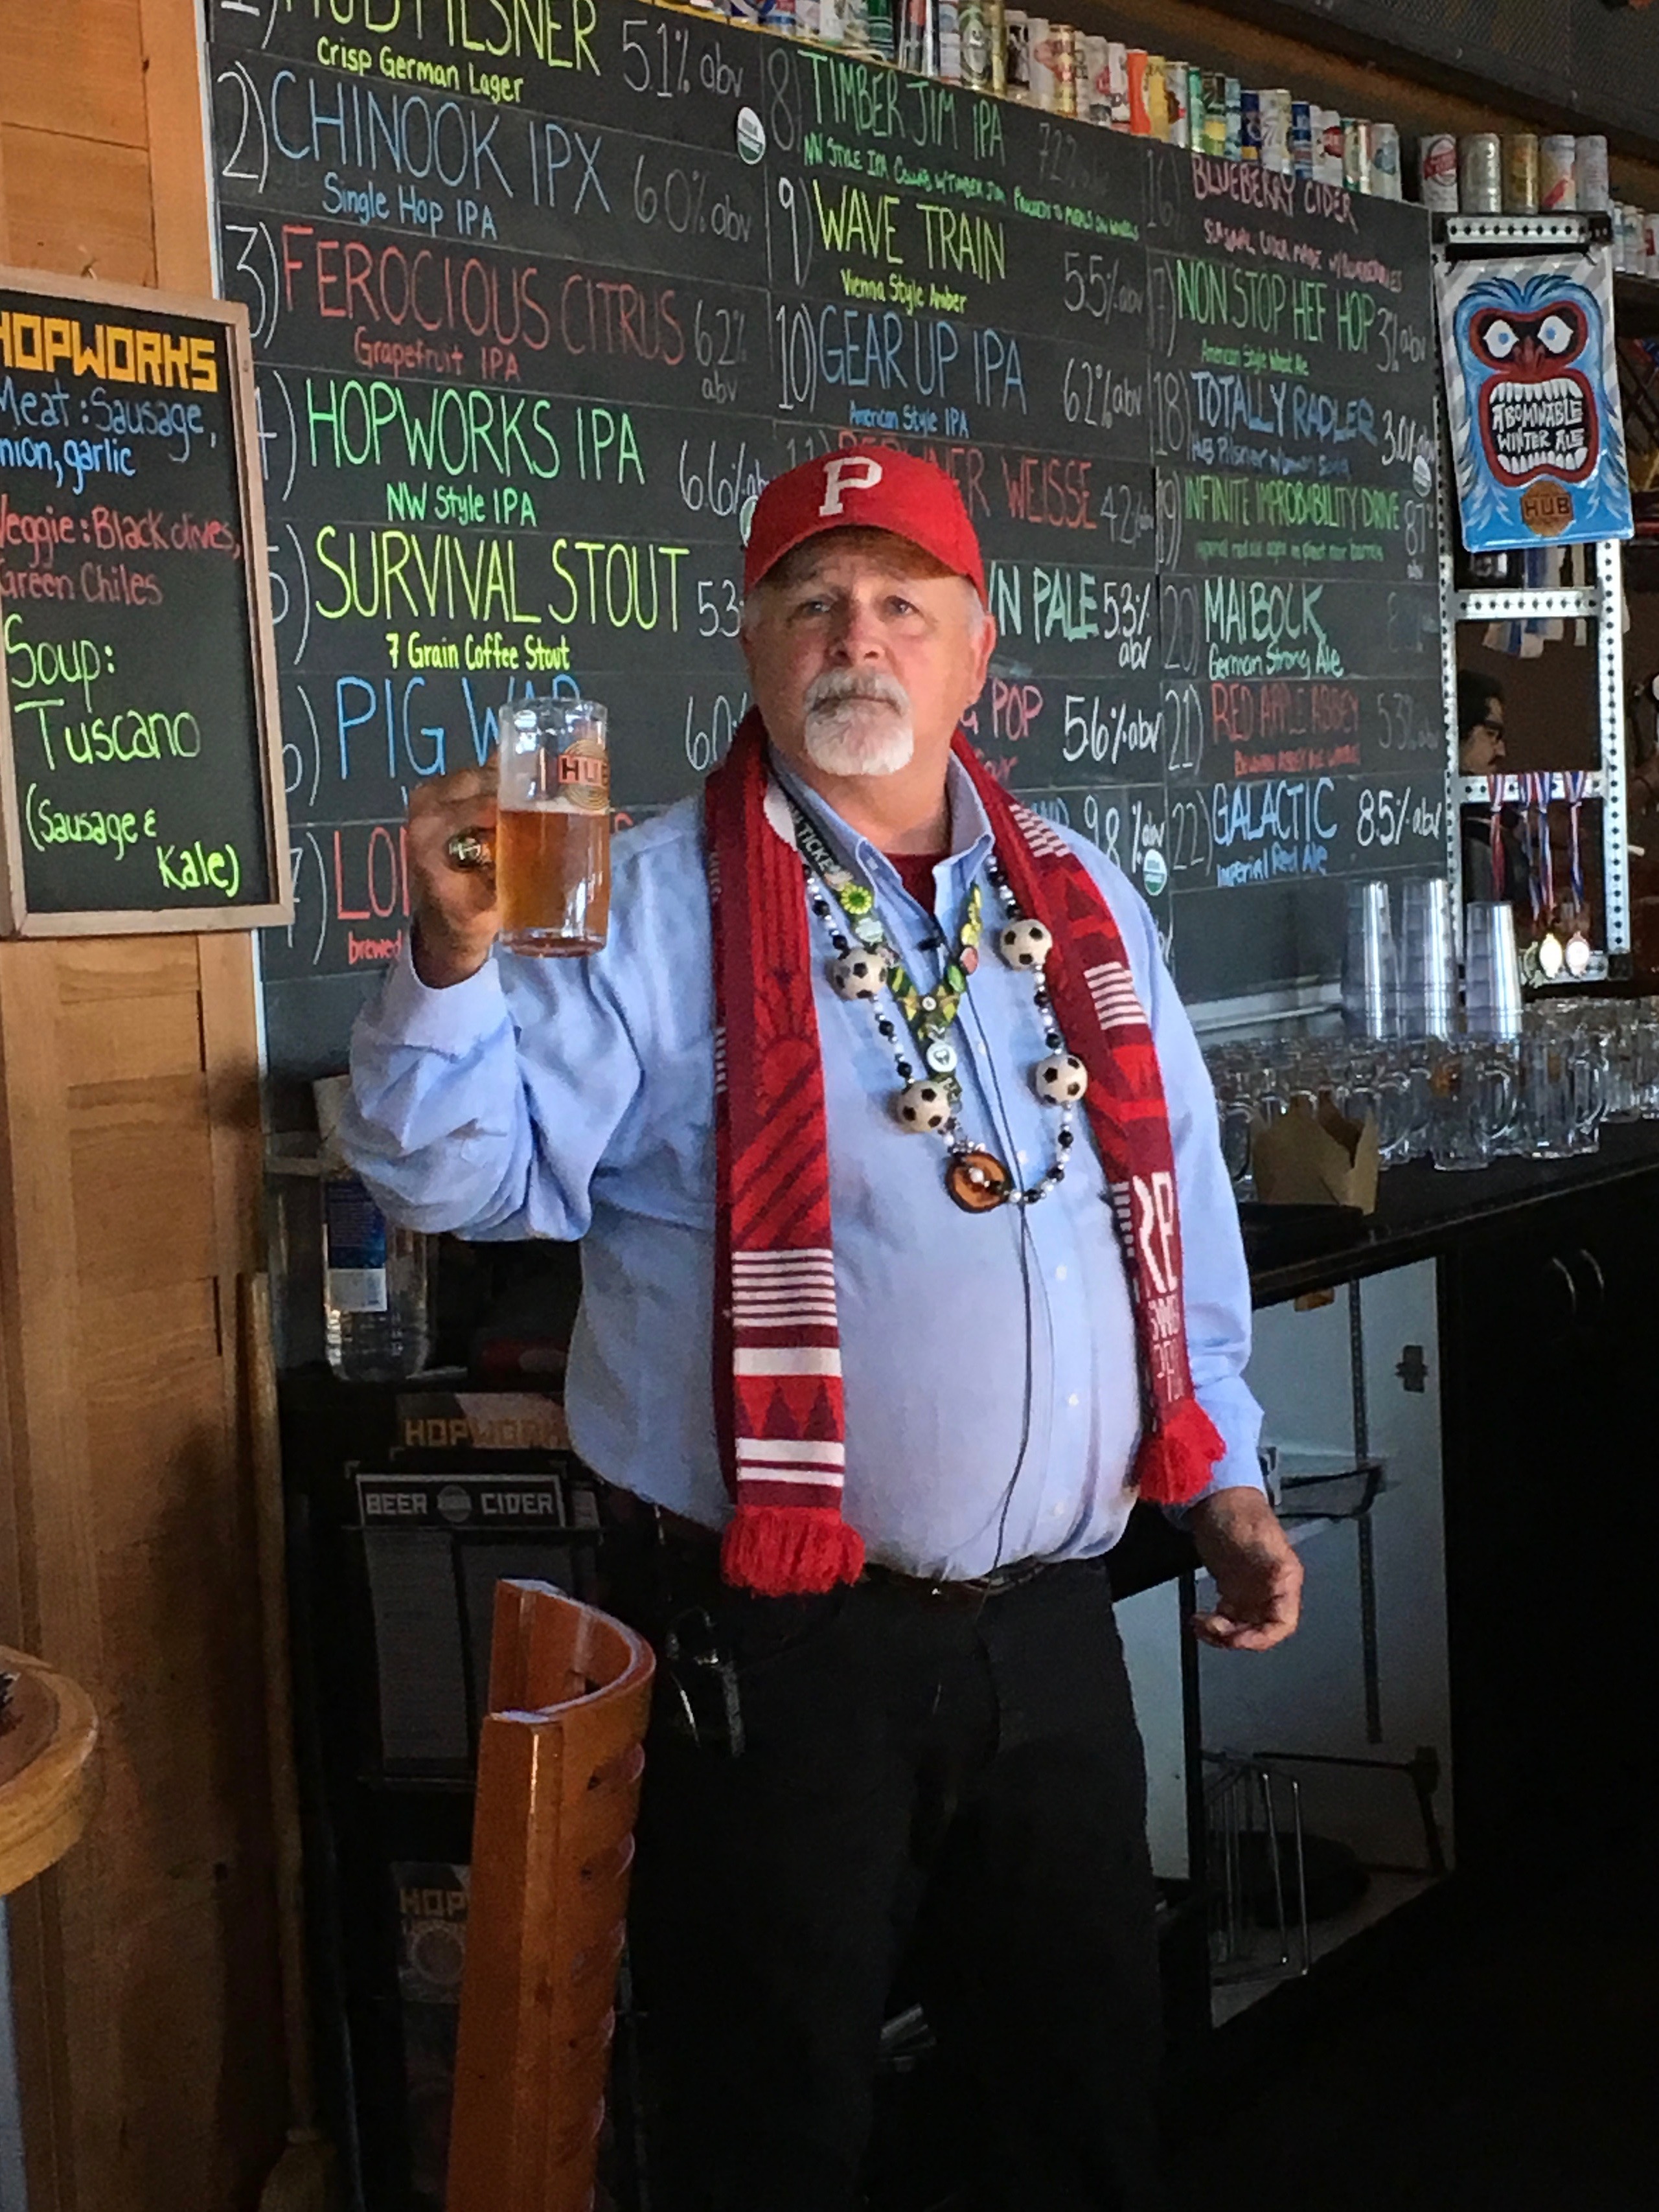 Hopworks honored Timber Jim with a beer during the 2017 Timbers season. (photo by Cat Stelzer)